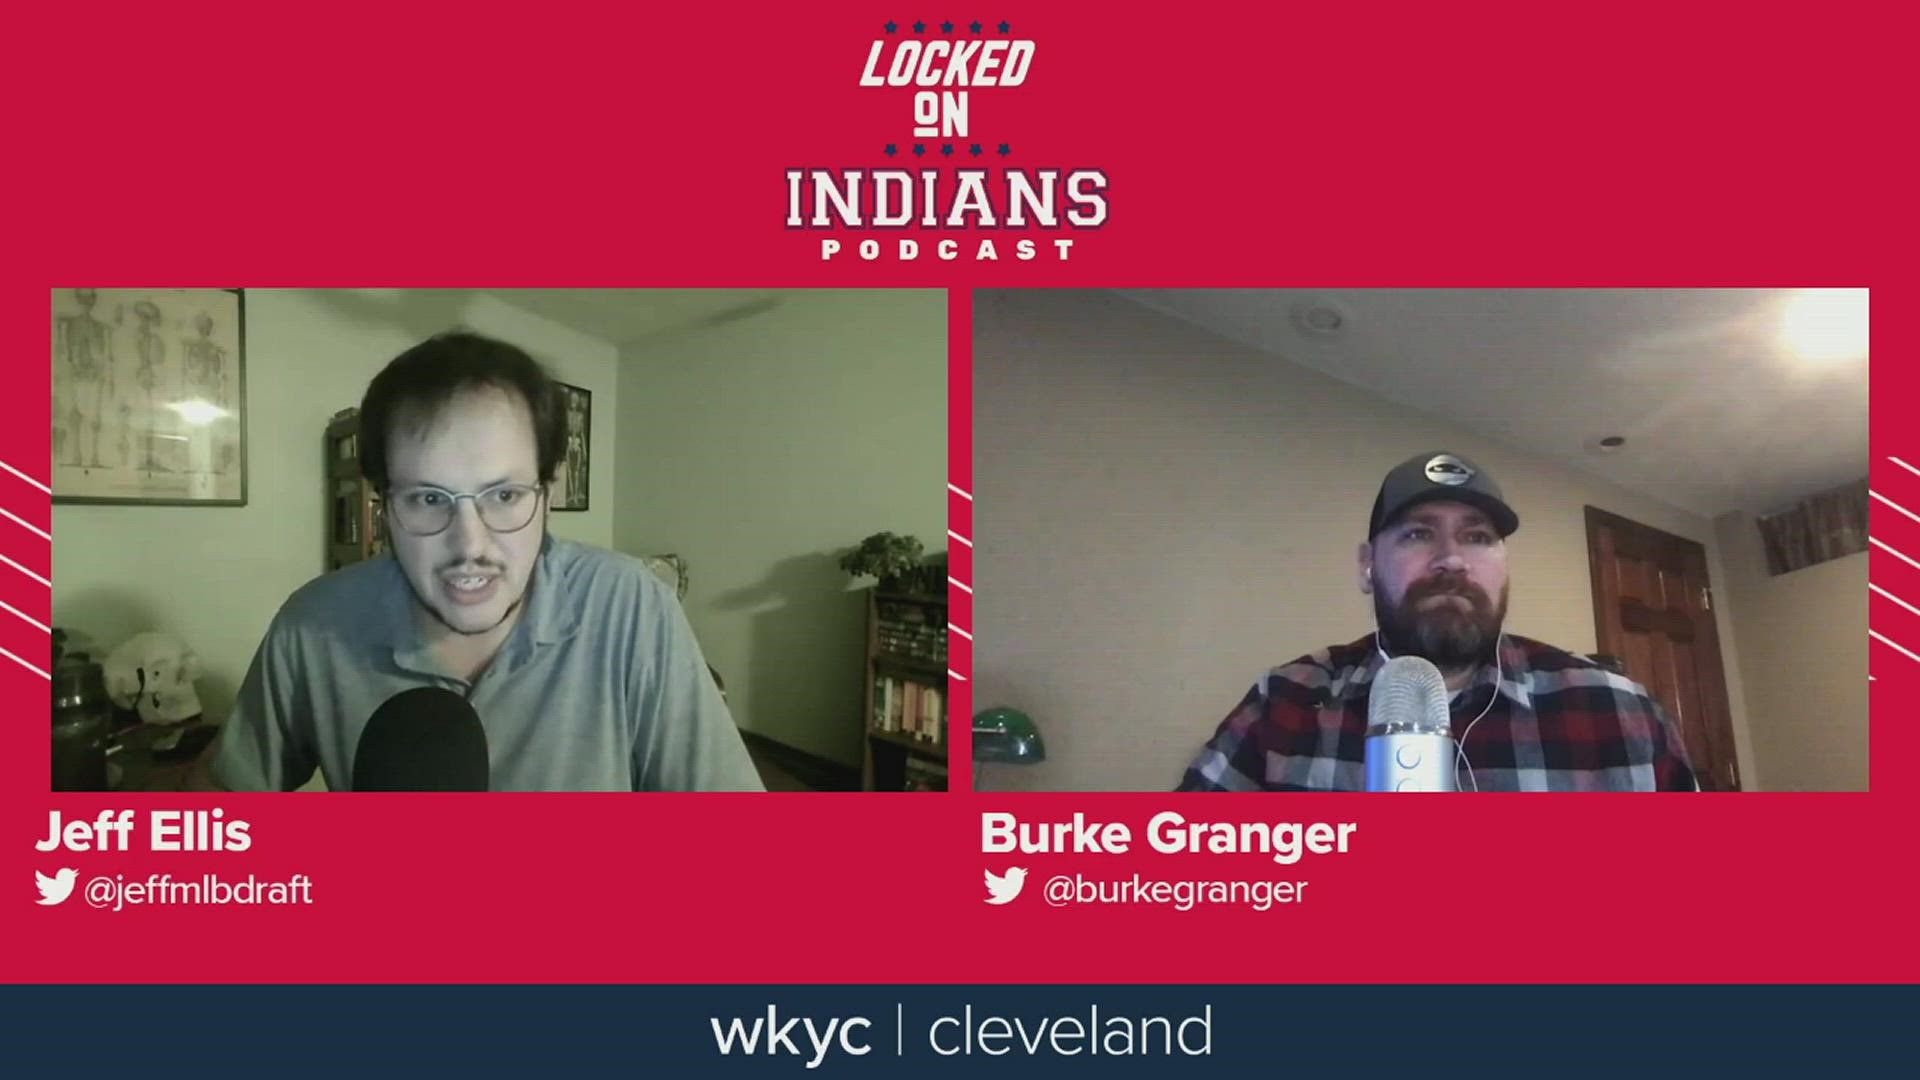 Burke Granger joins the podcast to talk scouting, favorite players, and what he looks for in a blue chip prospect.